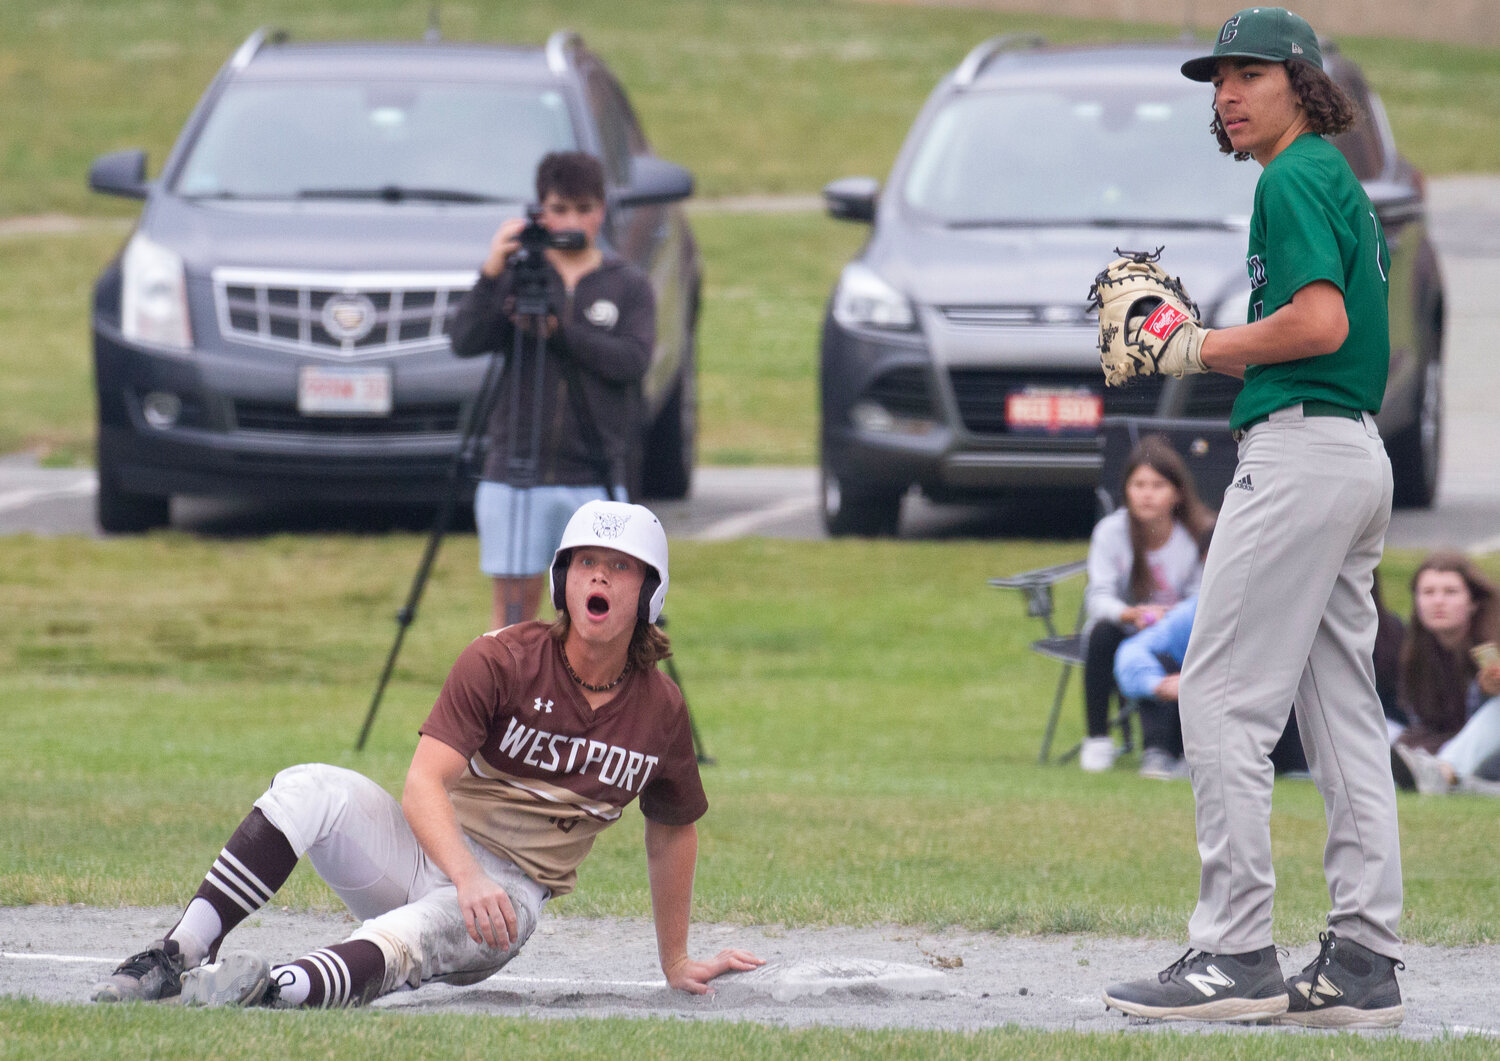 Noah Sowle gets picked off of first base by Greenfield pitcher Mike Pierce.